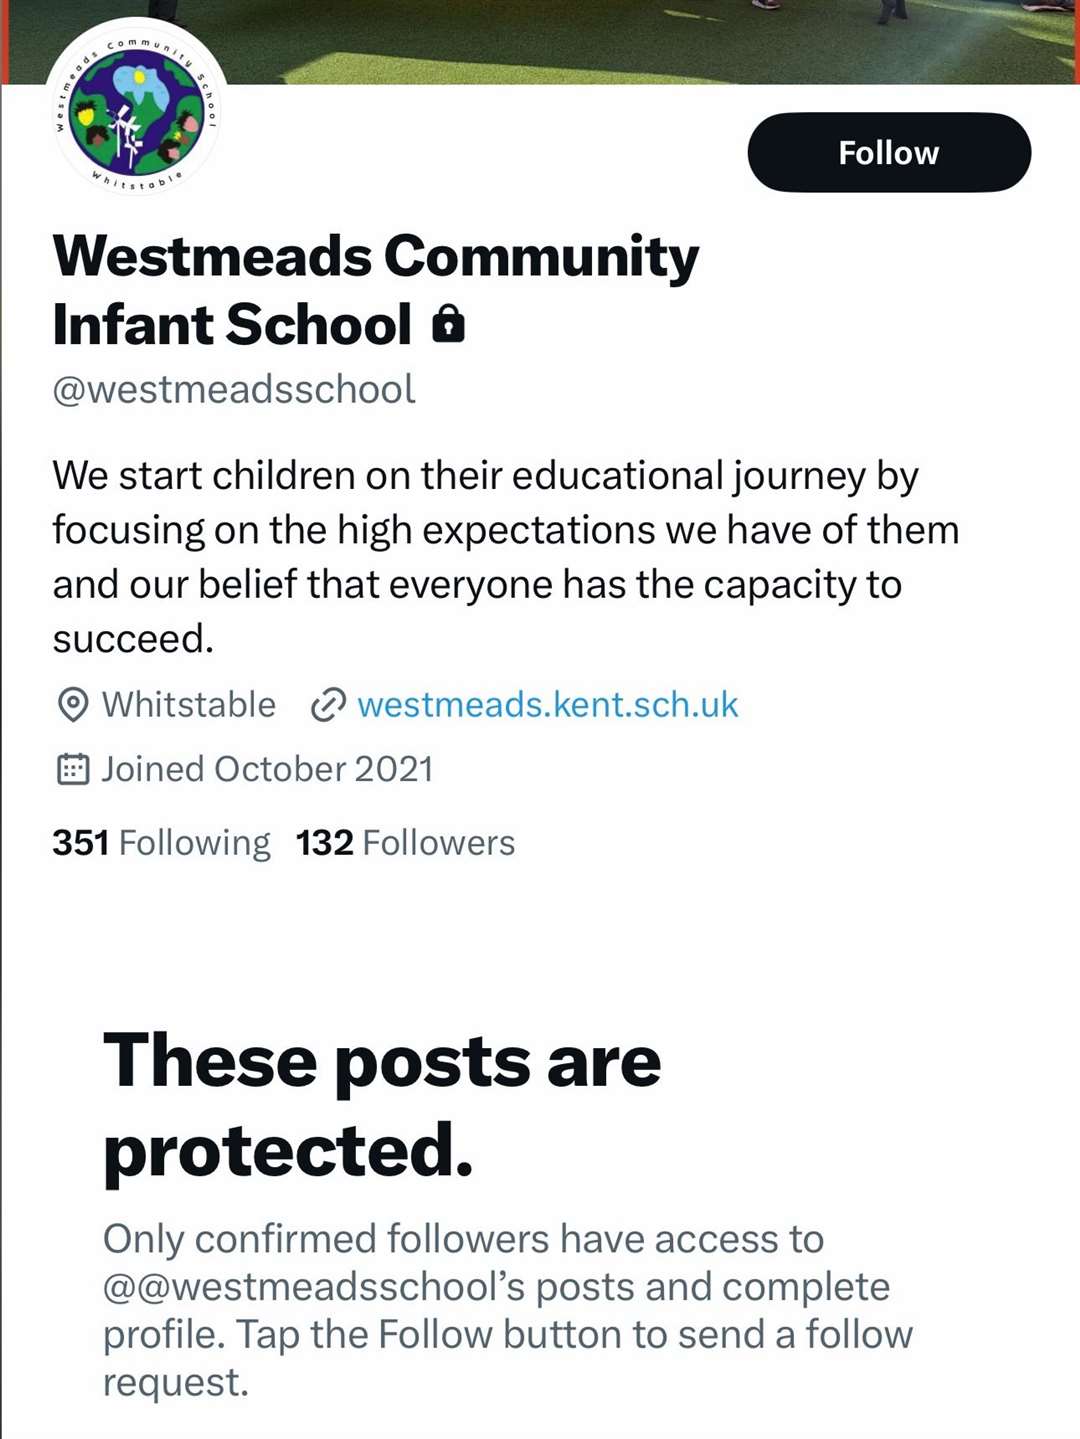 Westmeads Community Infant School has locked its X profile to prevent people viewing its posts